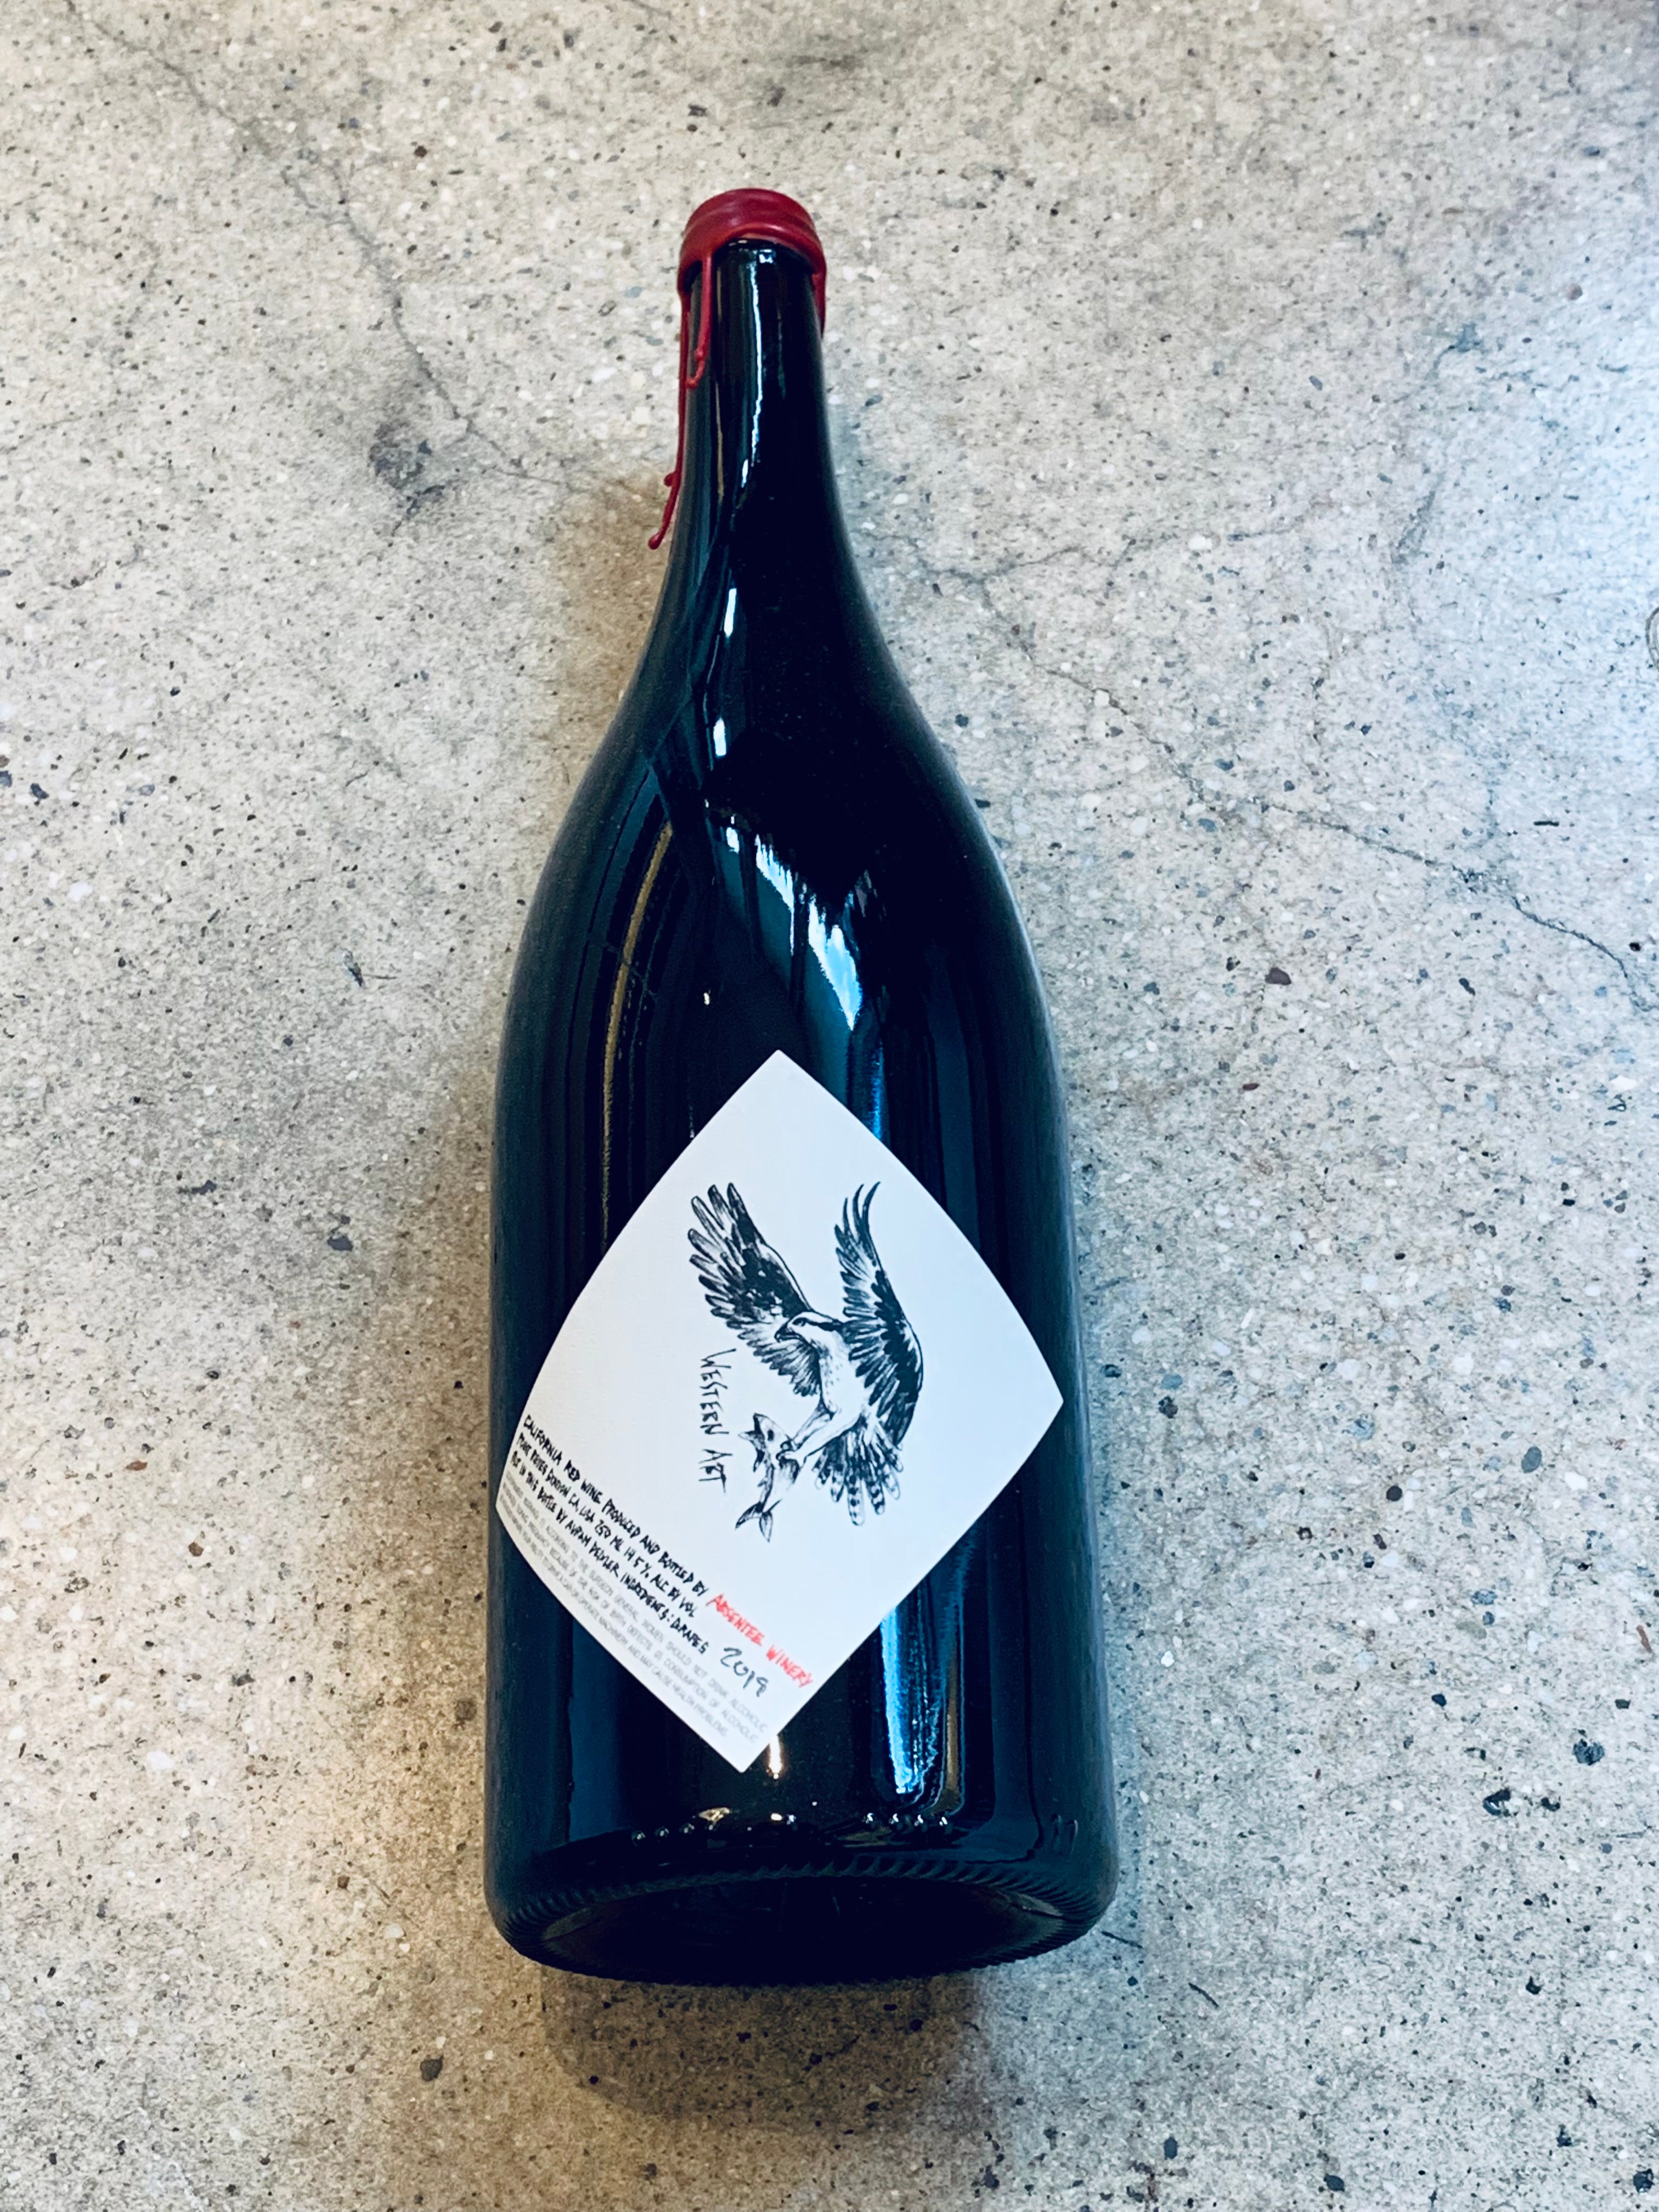 Absentee Winery - Western Art 2019 MAGNUM 1.5L (14.5% ABV)